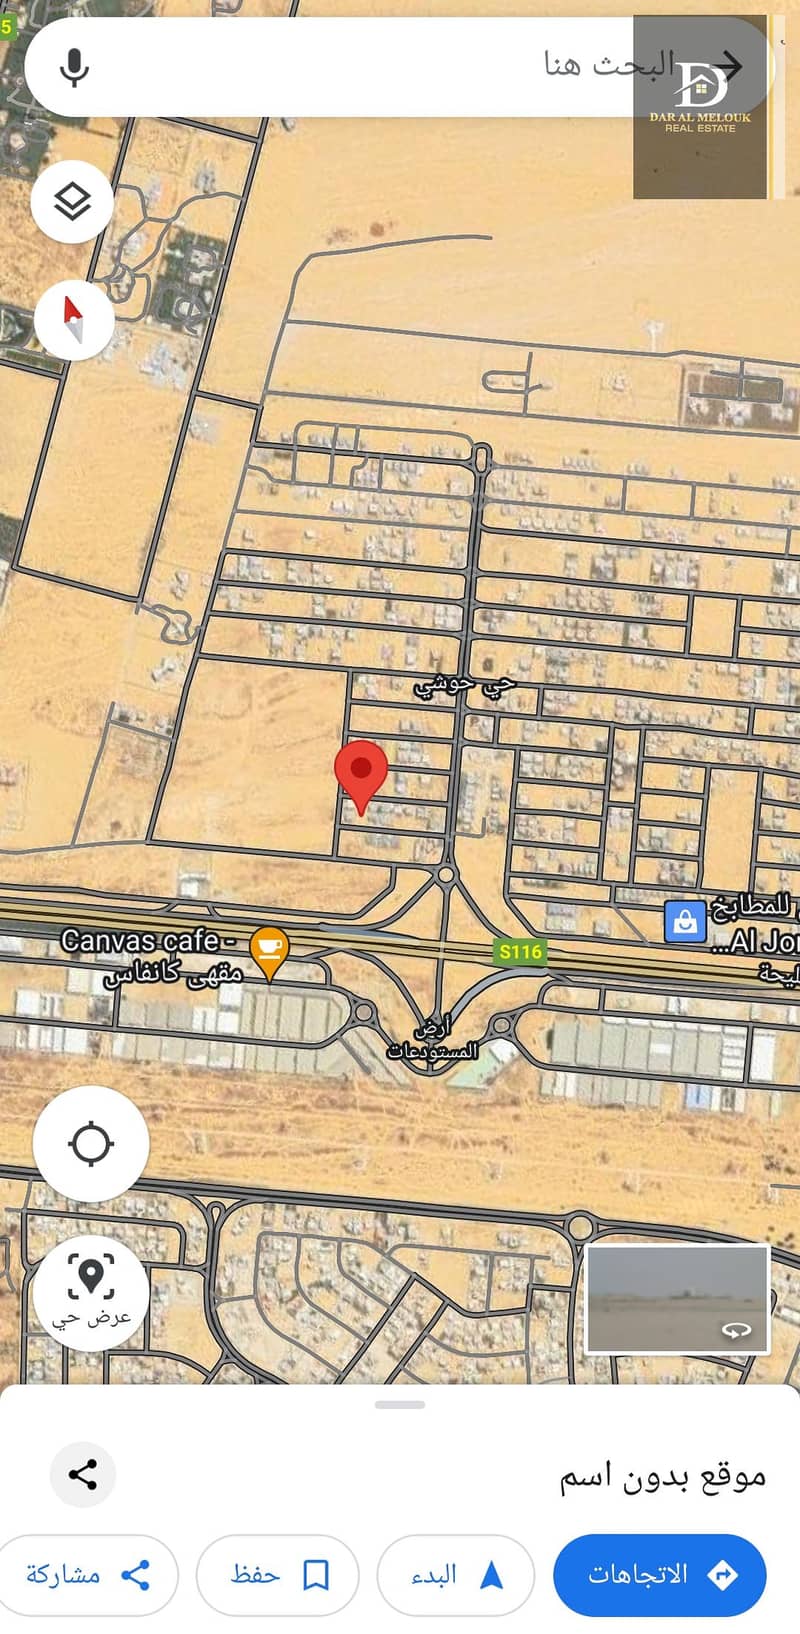 For sale in Sharjah, Al-Hoshi area, residential and investment land, area of ​​10,000 feet, a permit for a ground and first villa, and two adjacent villas are declared, a very excellent location, the third piece of Maliha Street. The Al-Hoshi project is c